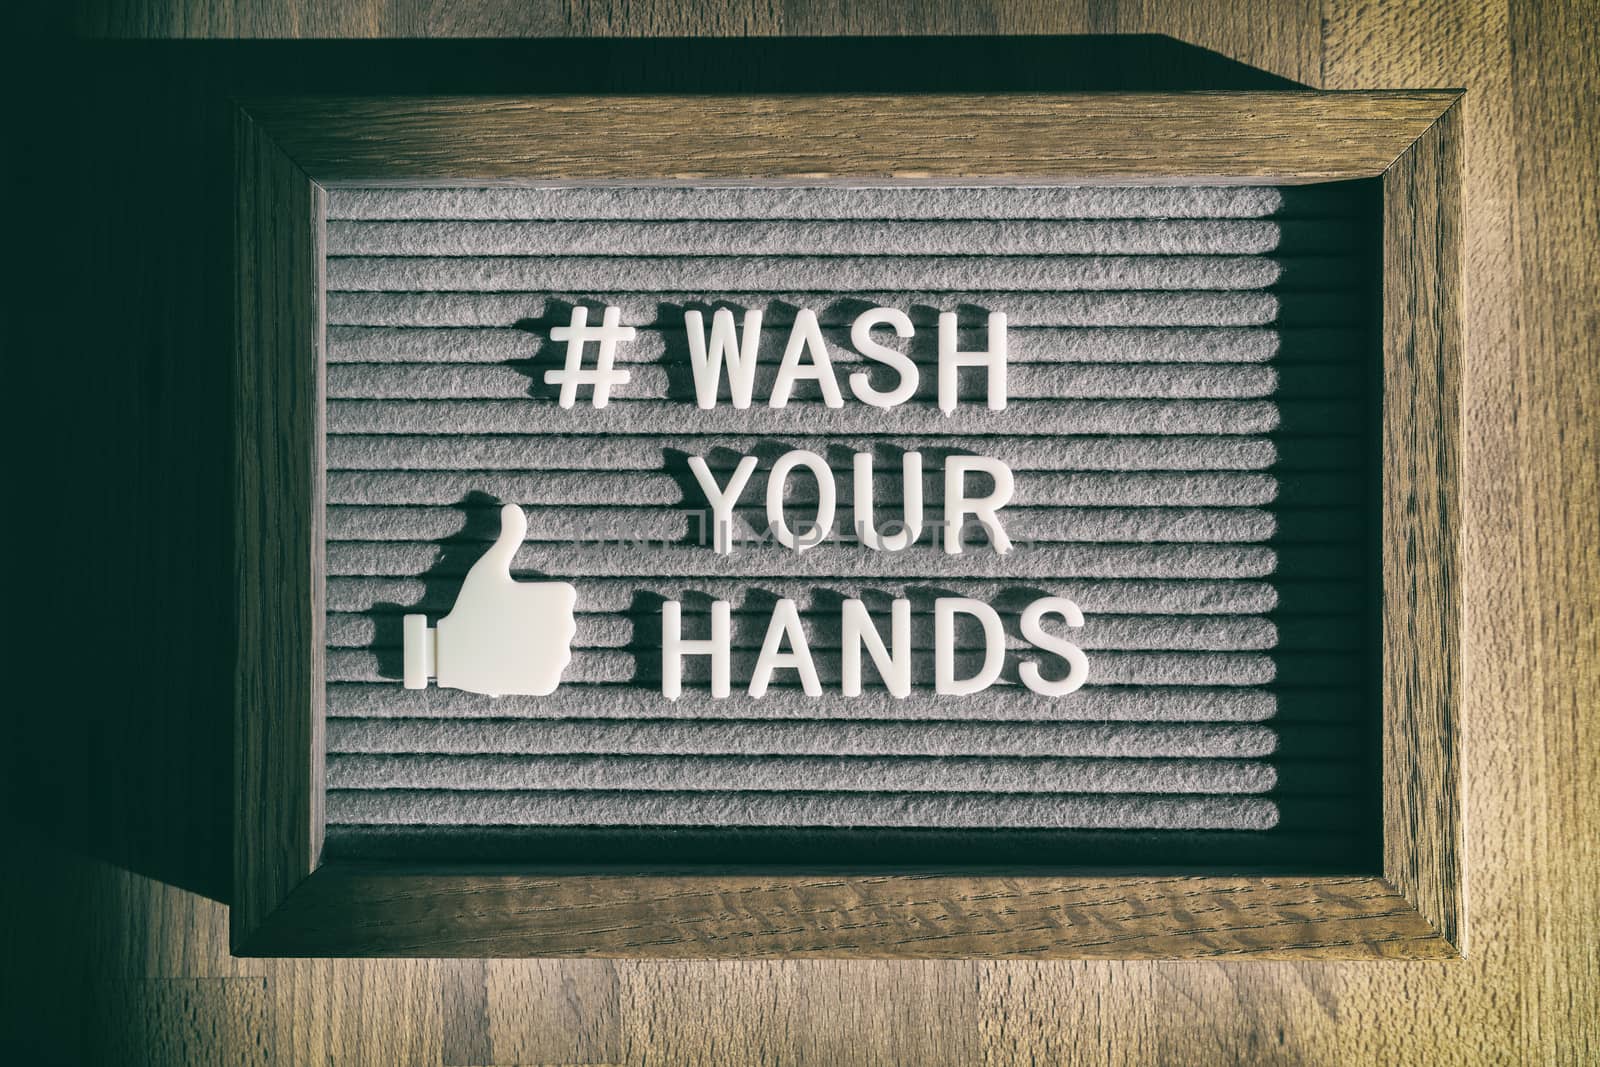 COVID-19 hand hygiene coronavirus message social media text for washing your hands hashtag. Corona virus felt board sign with letters WASH YOUR HANDS by Maridav